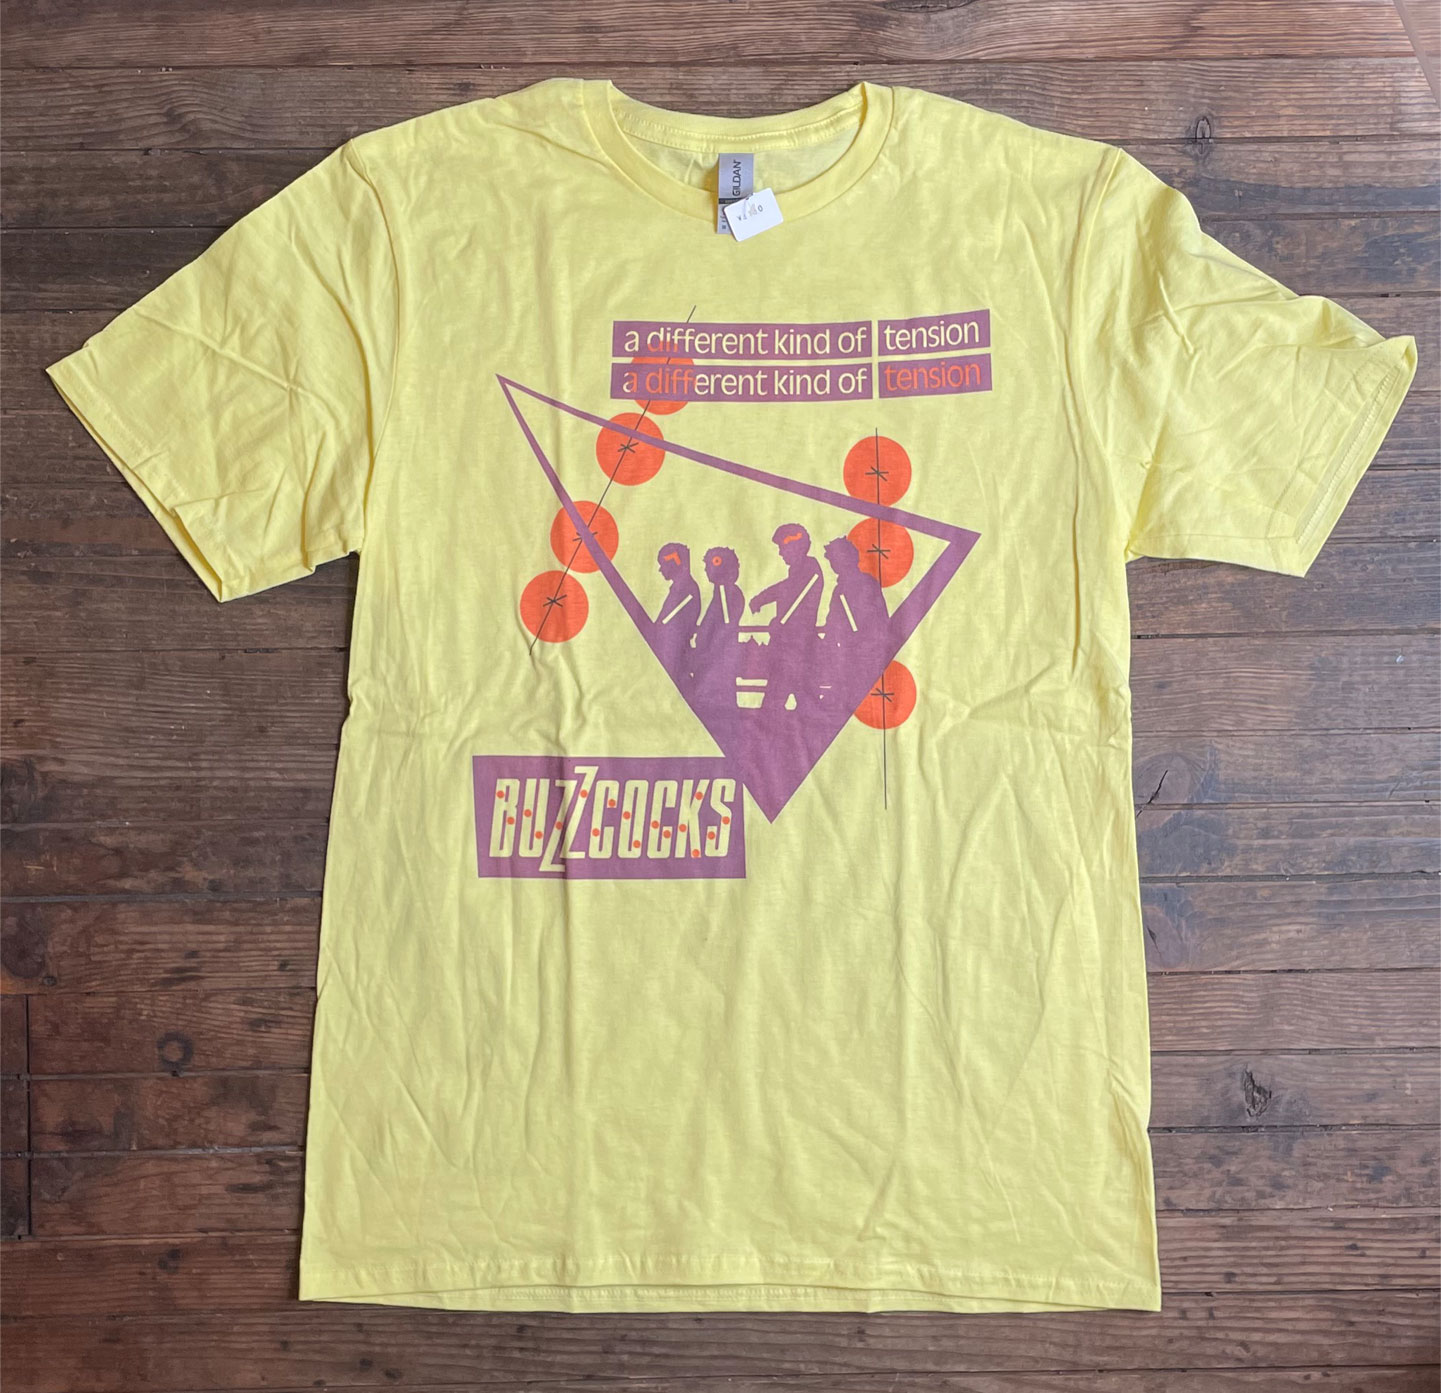 BUZZCOCKS Tシャツ A Different Kind Of Tension